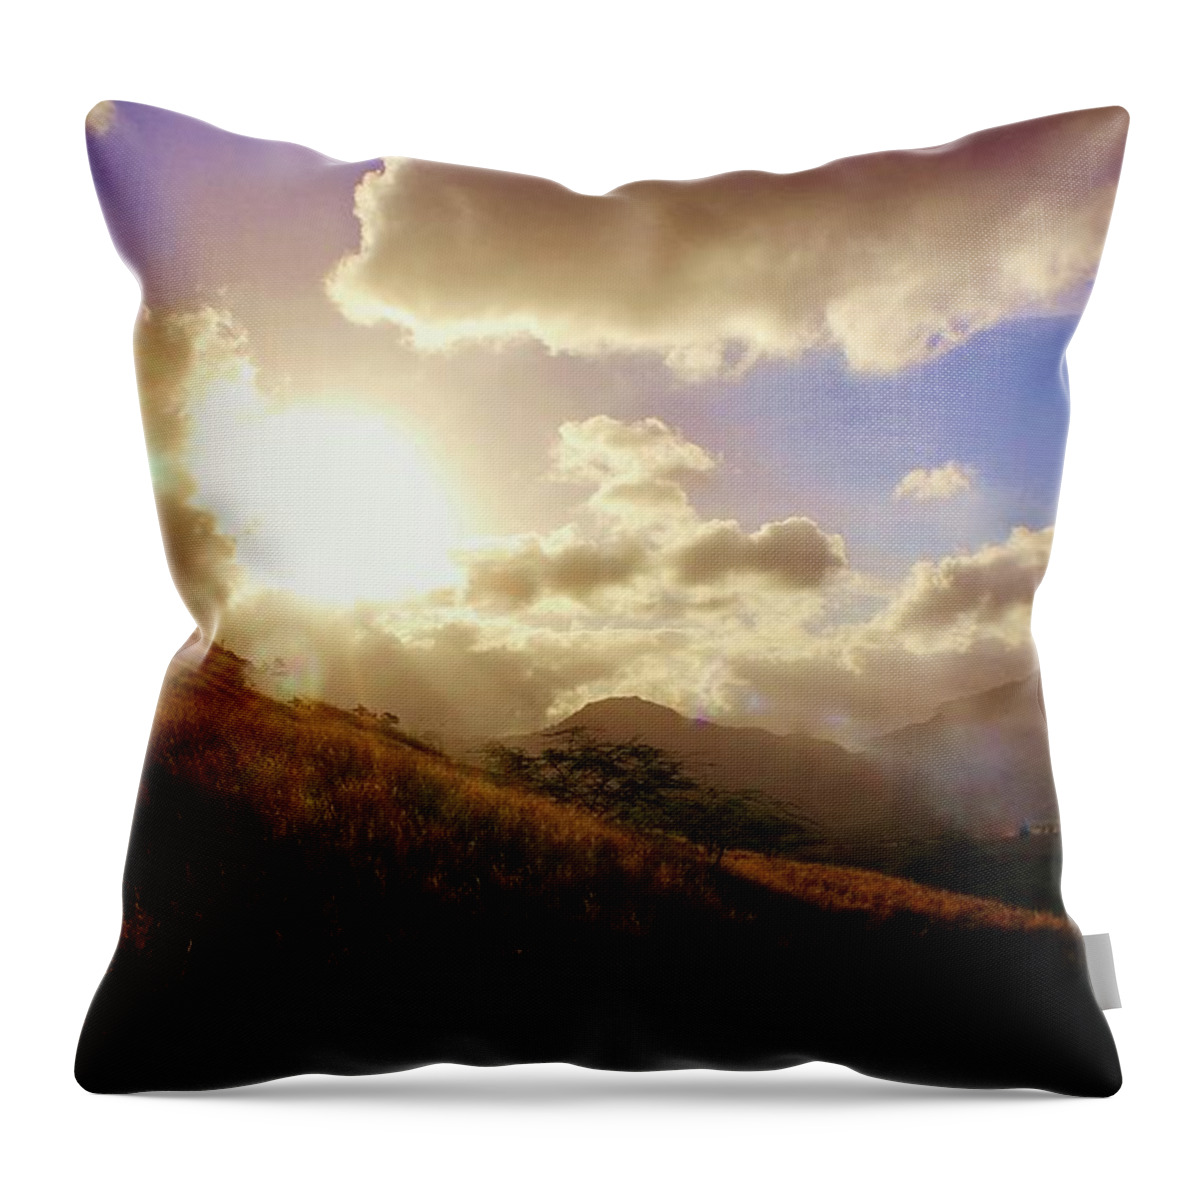 Sunrise Throw Pillow featuring the photograph A Good Morning by Craig Wood